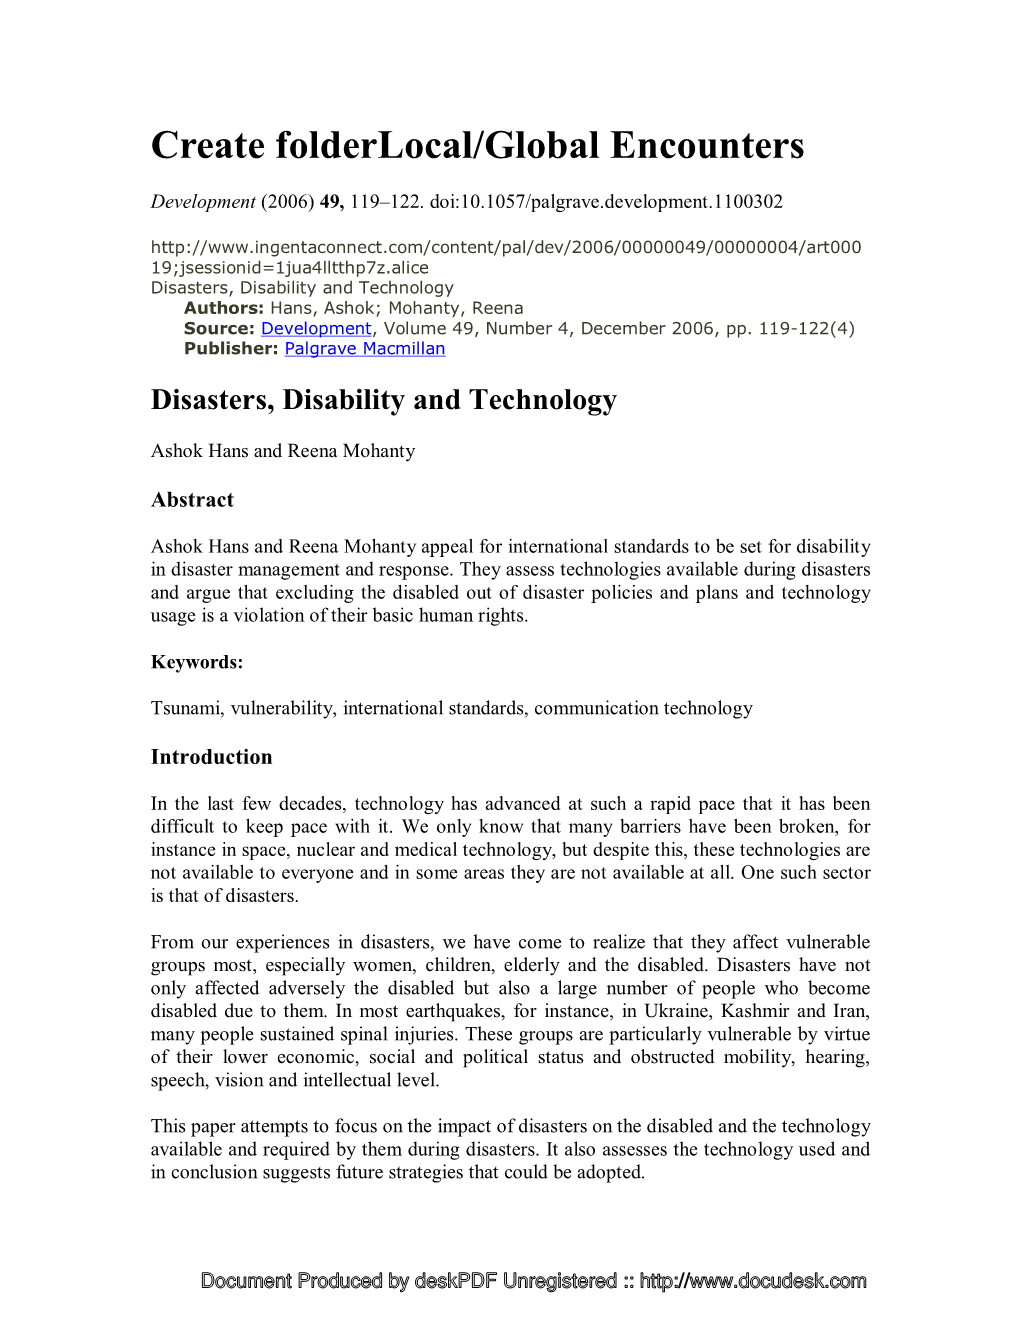 Article on Disaster, Disability & Technology